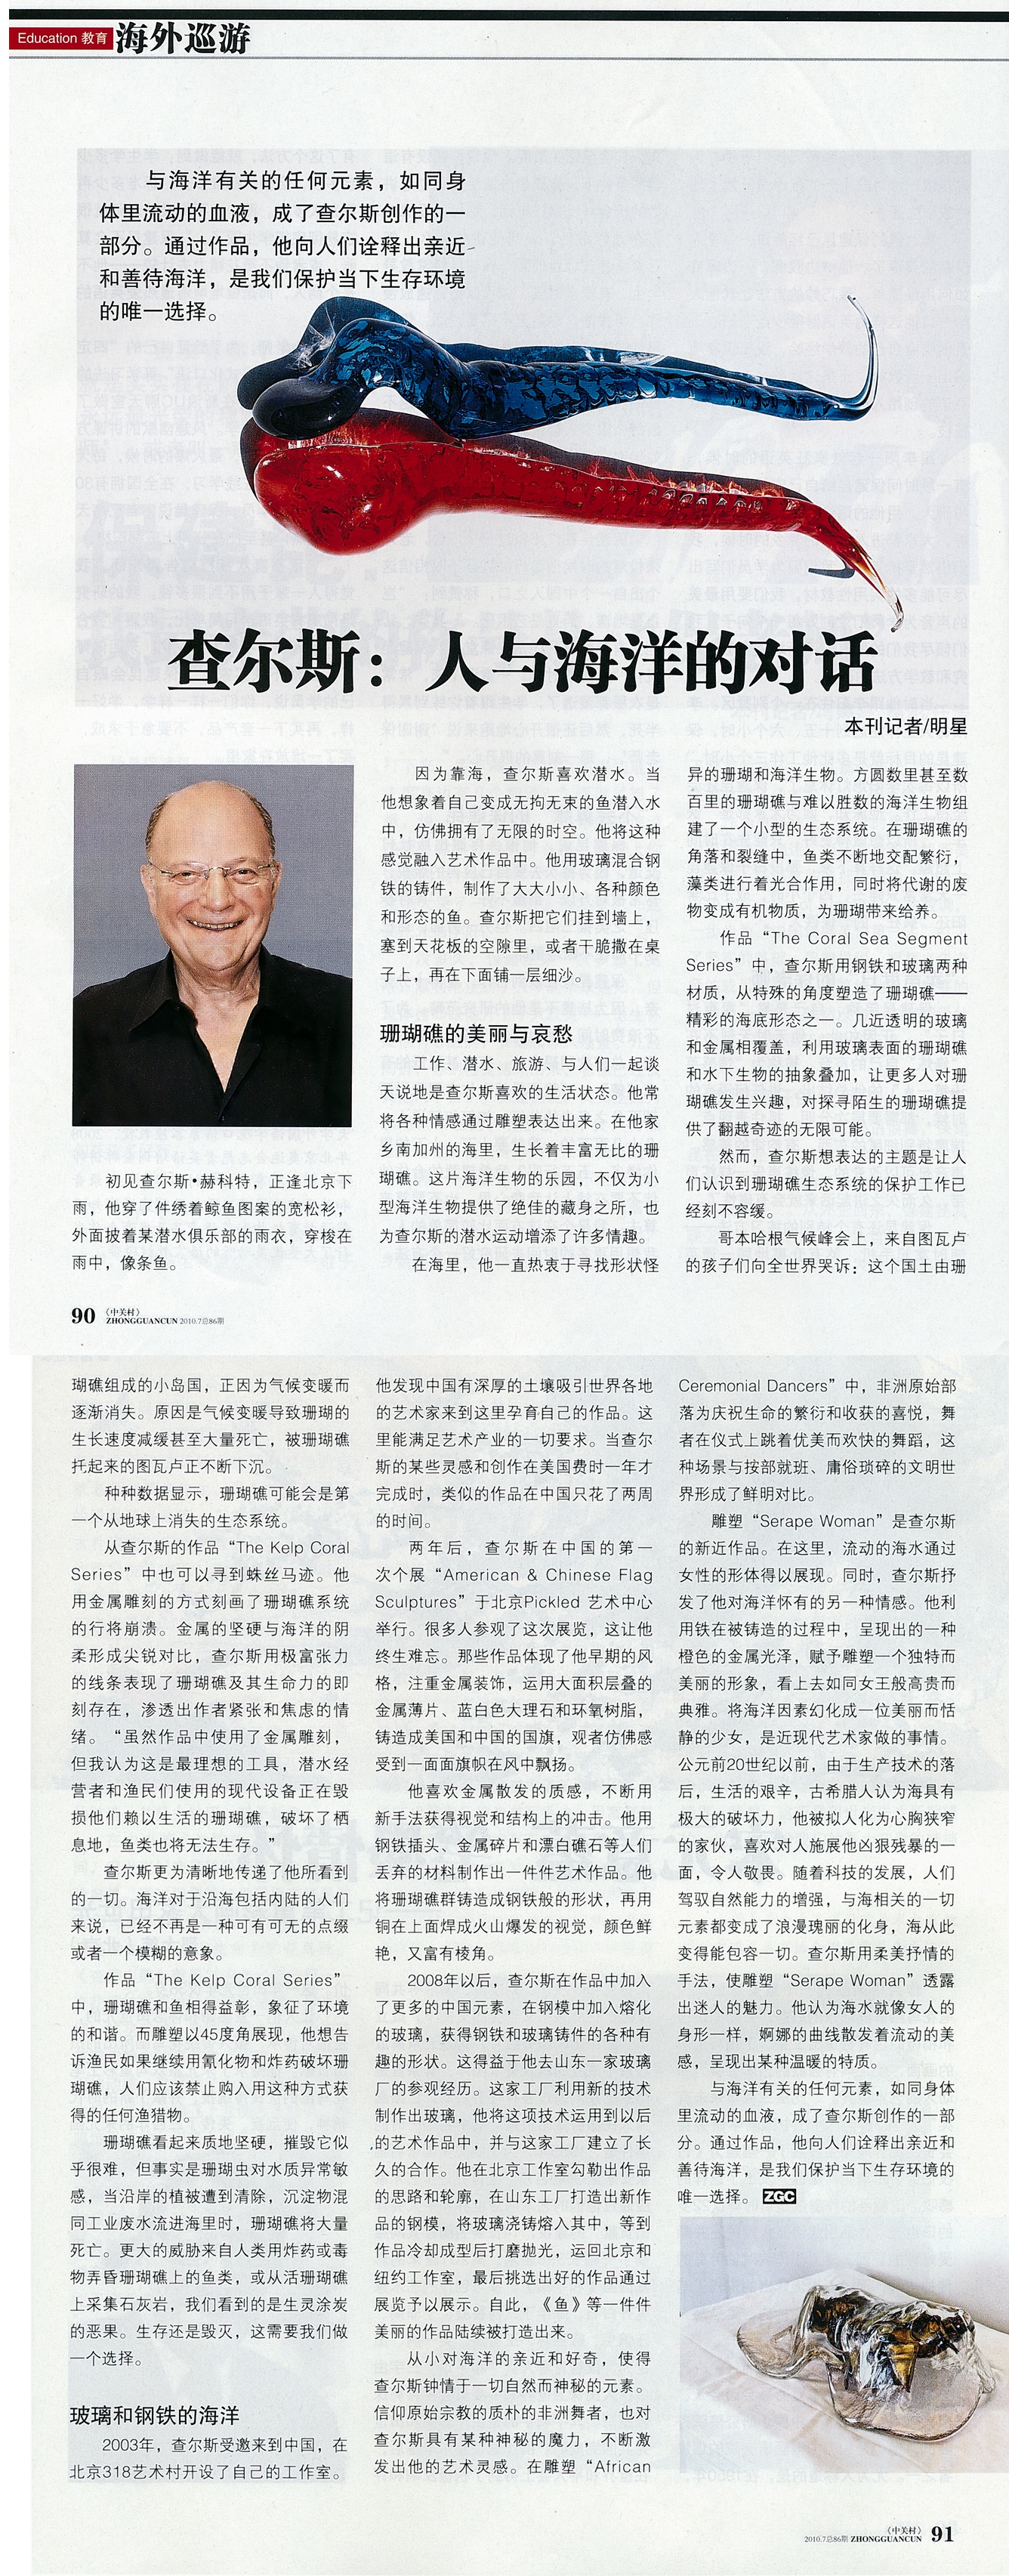 Chinese Article